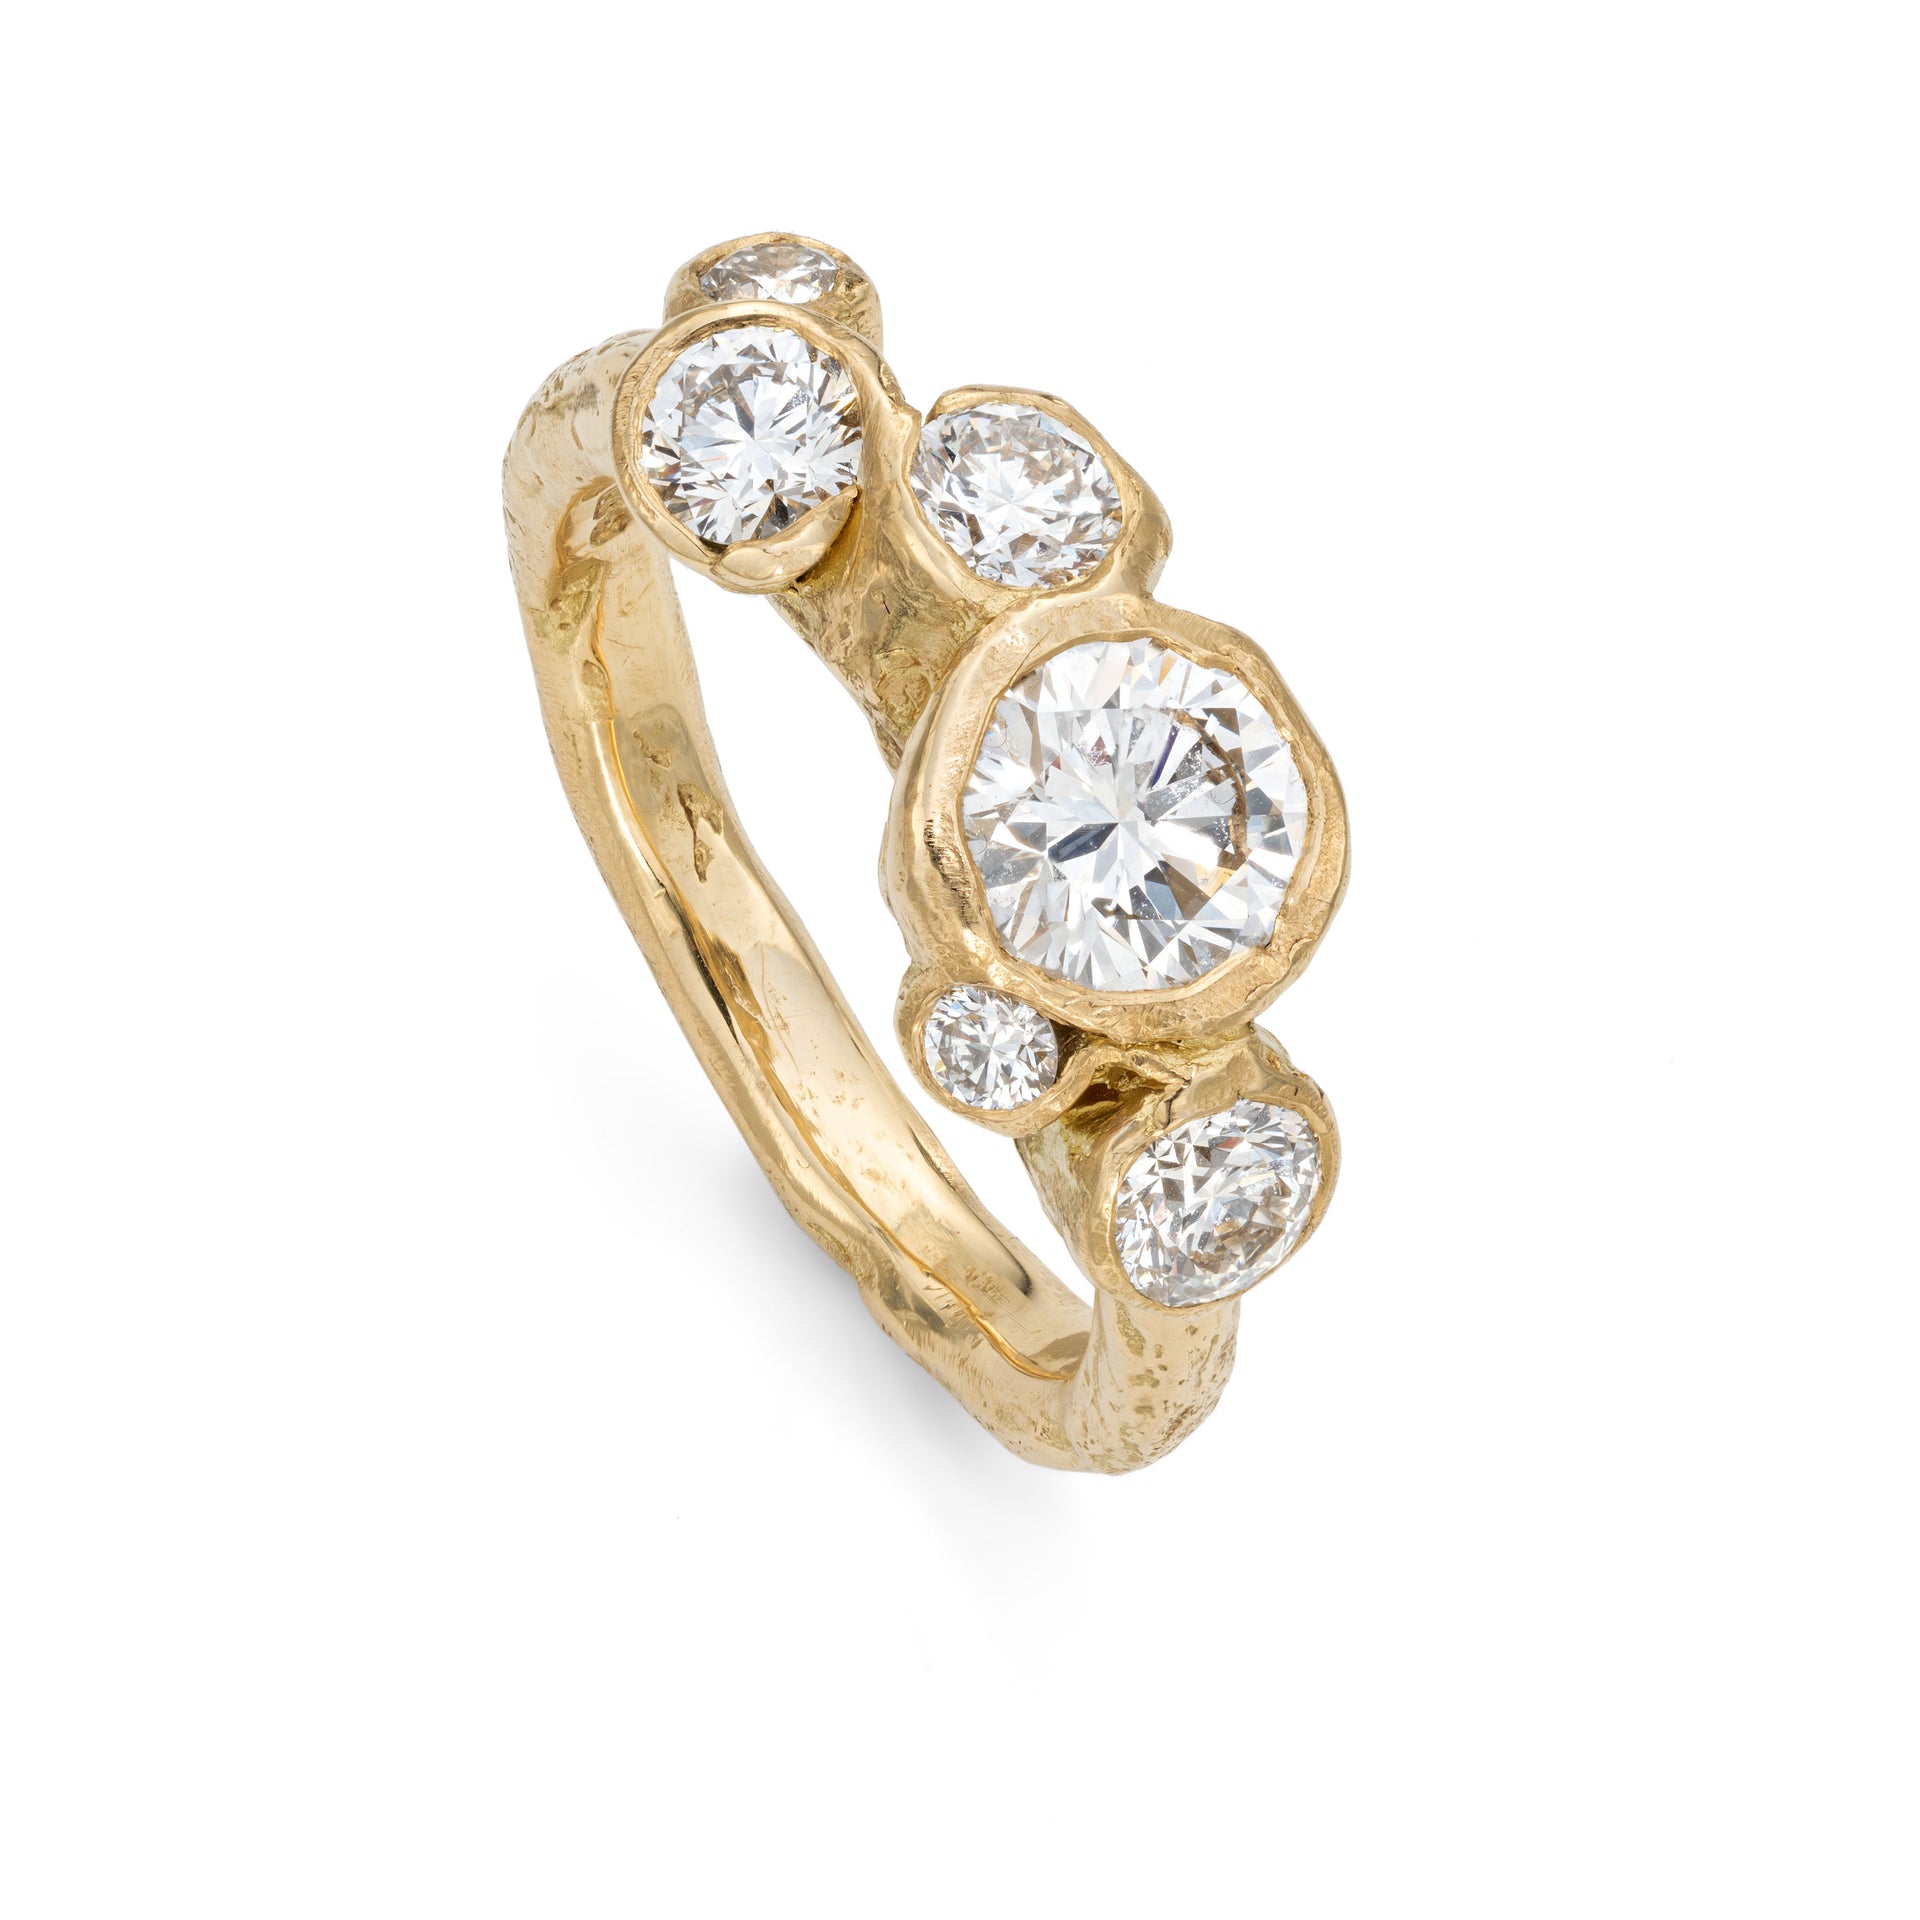 Upright, front view of a beach textured, unusual engagement ring, set with six diamonds. Handcrafted by Emily Nixon.